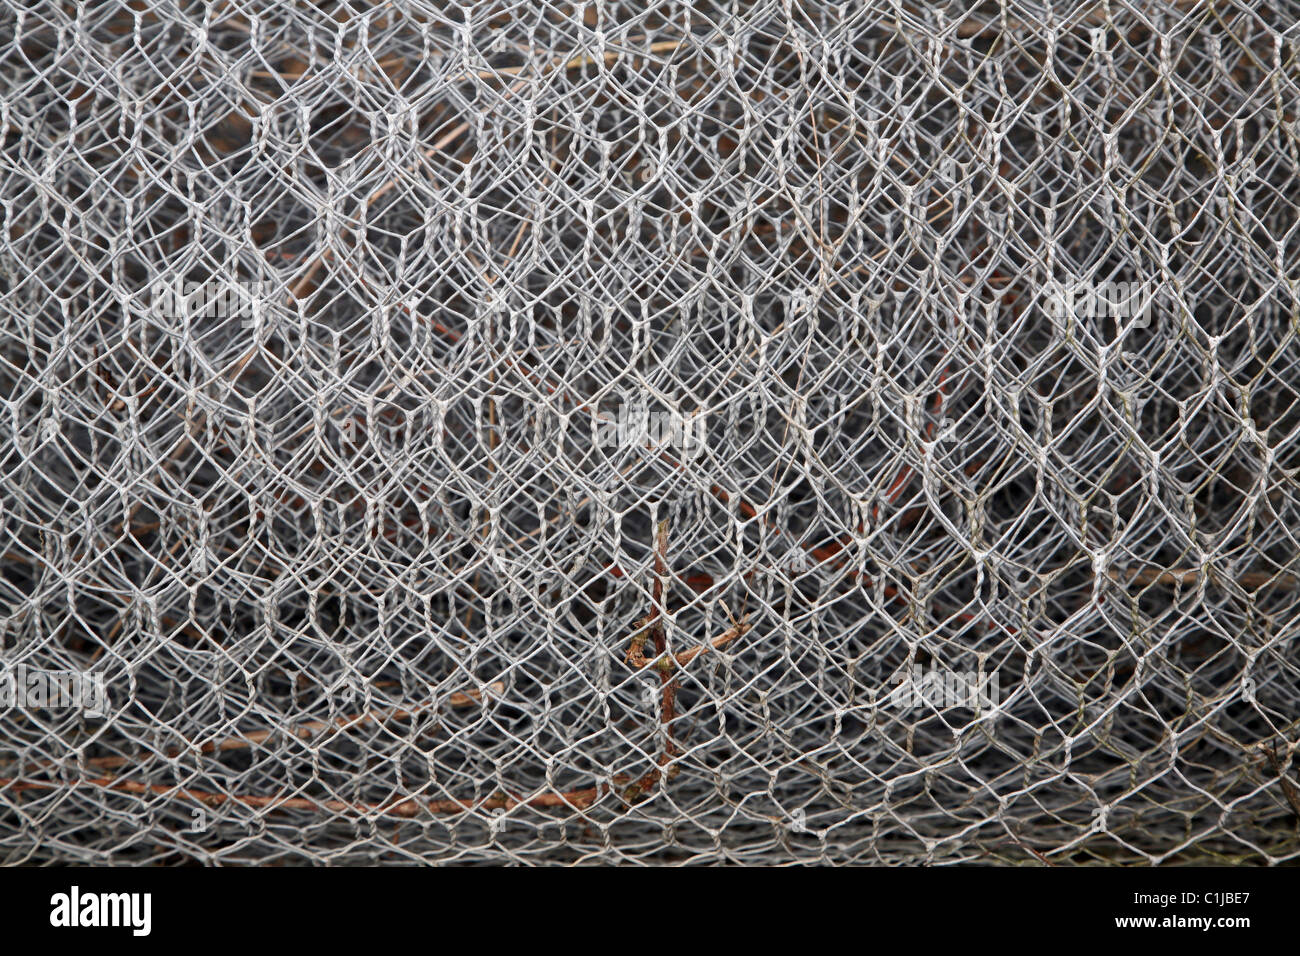 Close up chicken wire roll Stock Photo